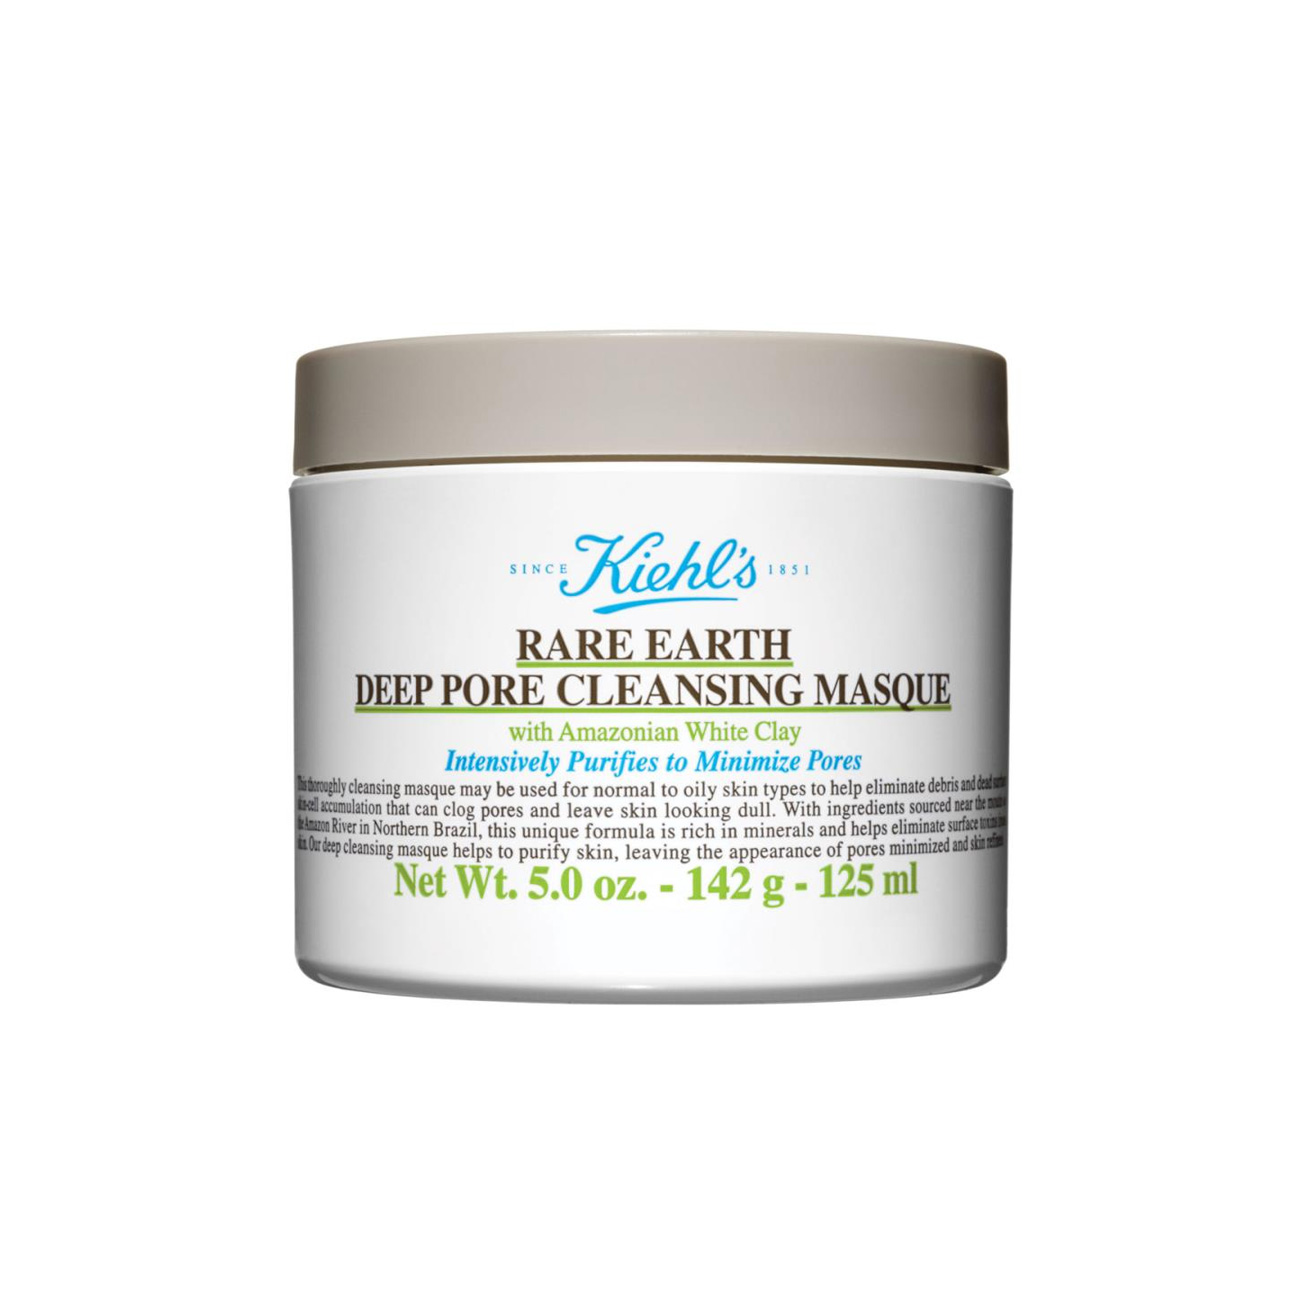 Kiehl's Rare Earth Deep Pore Cleansing Masque Duo Set